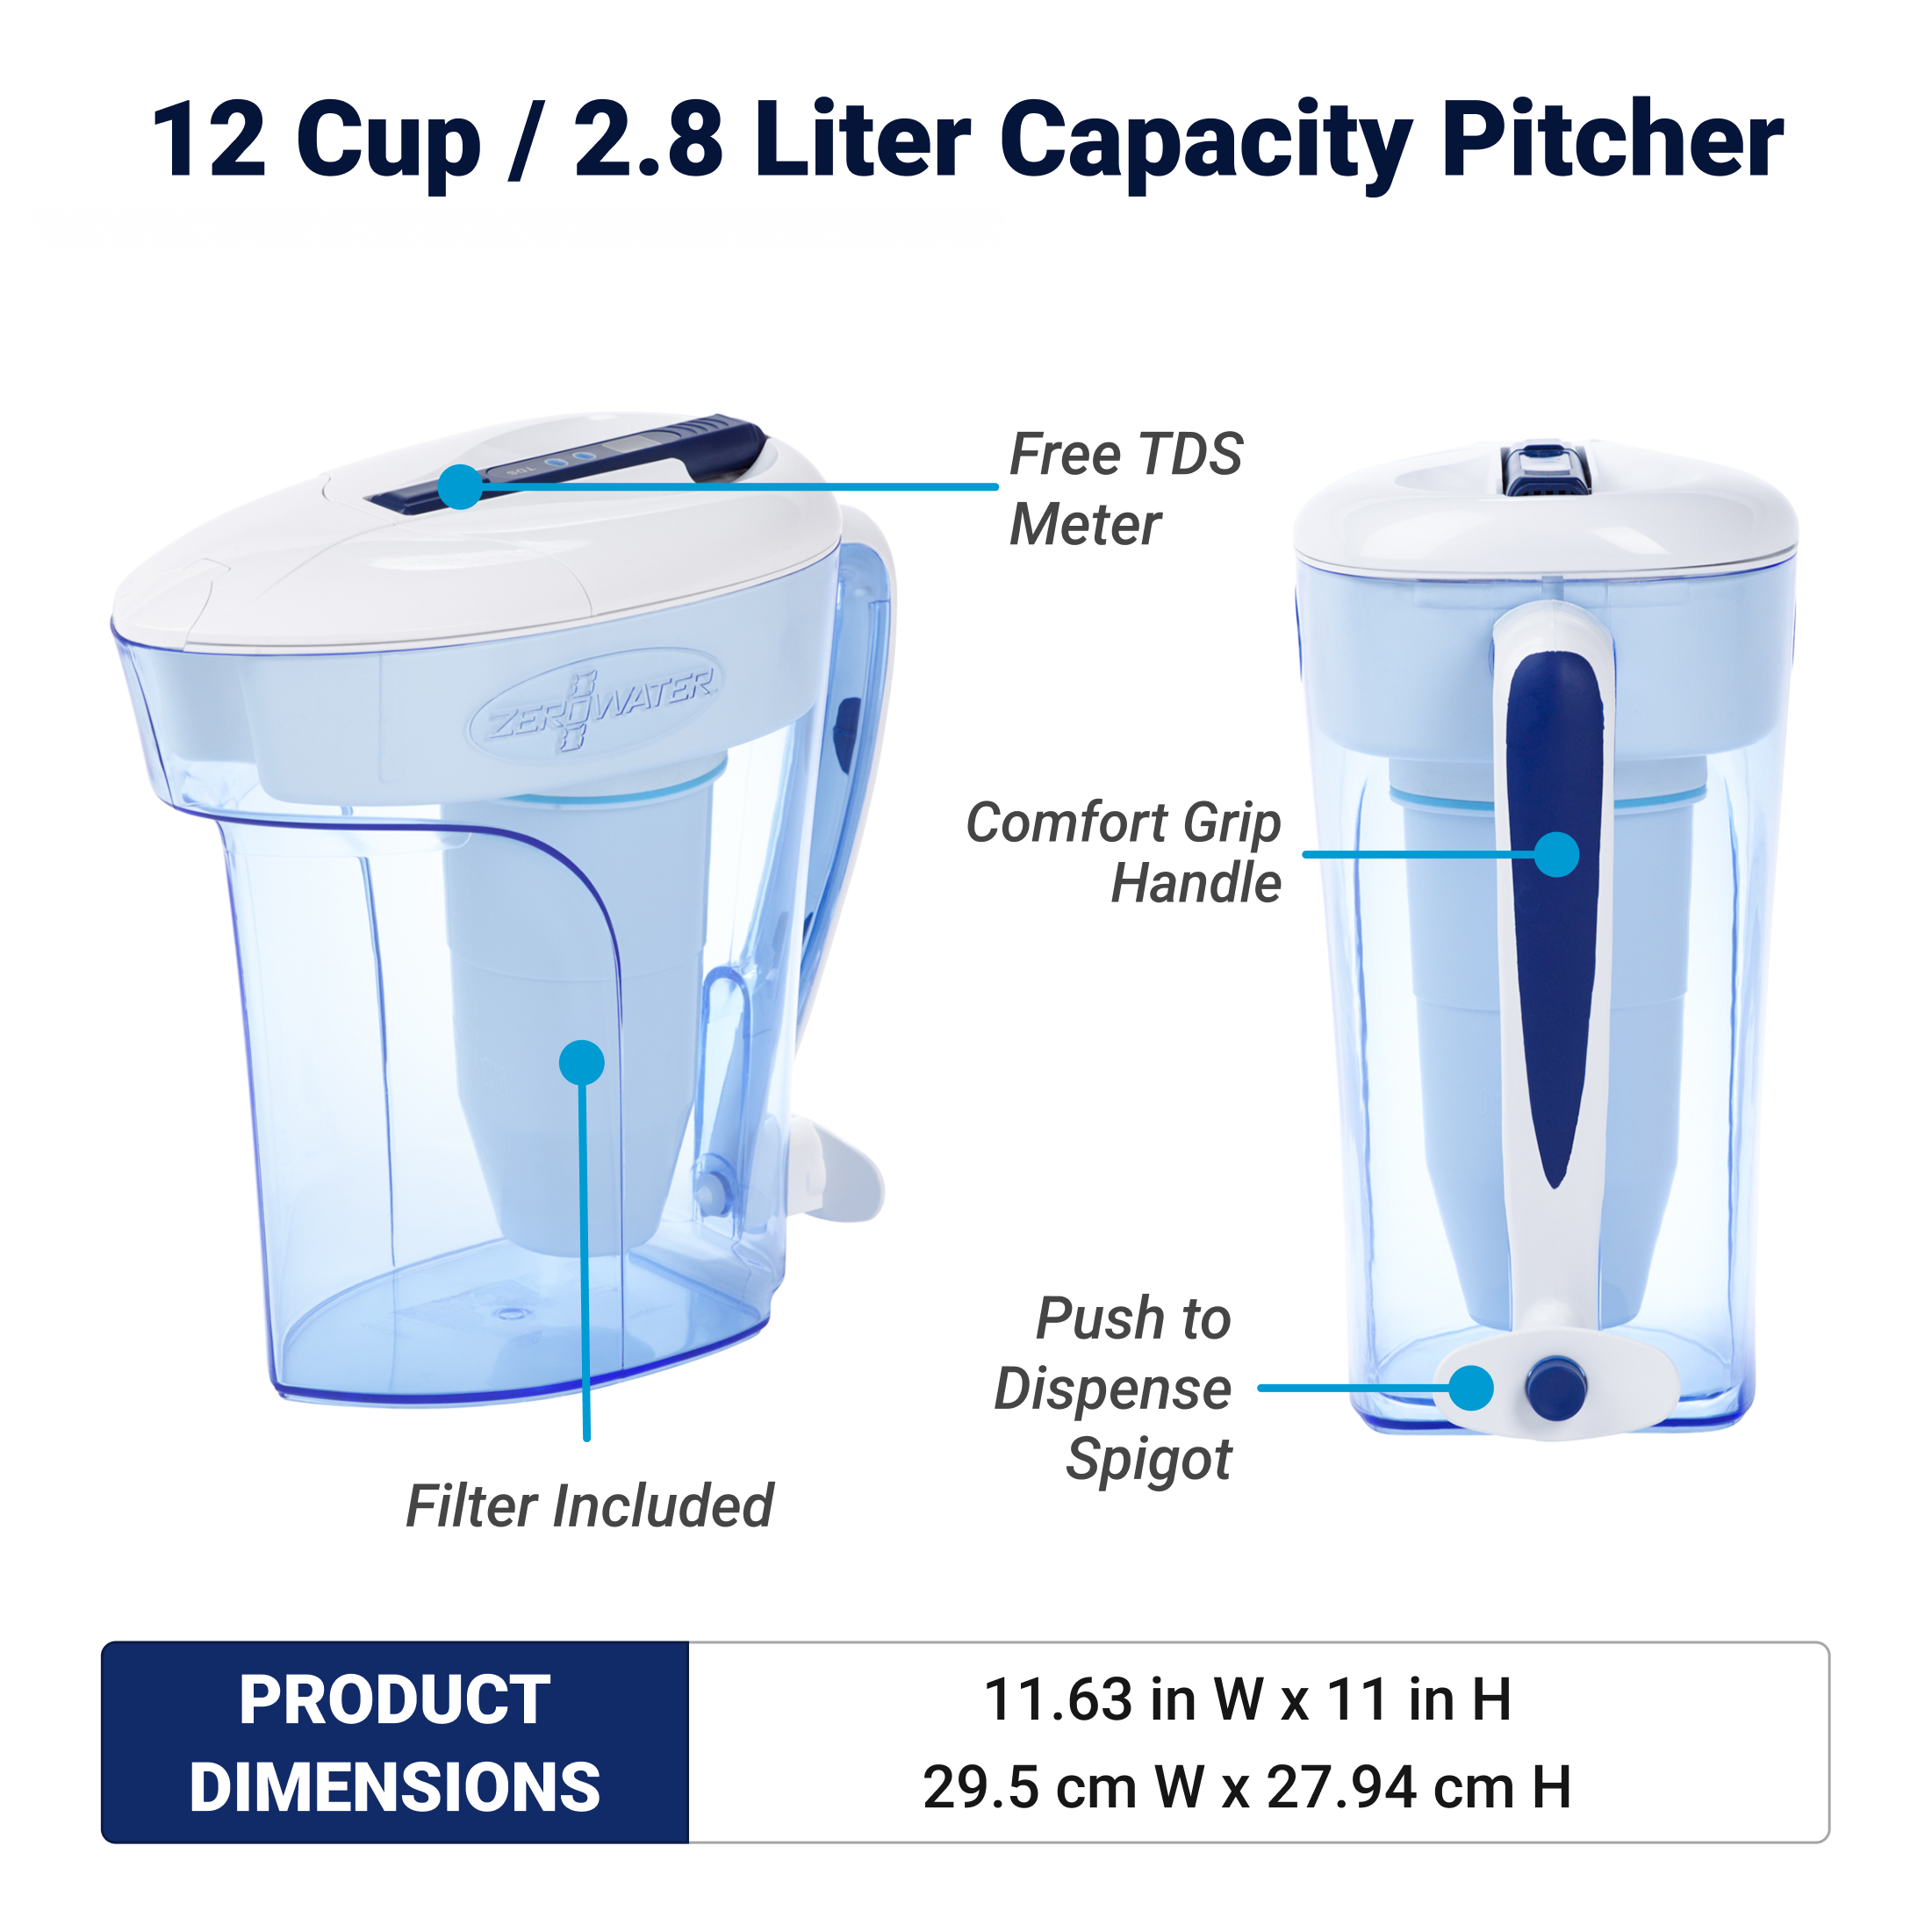 12 Cup/2.8 liter capacity  Ready-Pour Pitcher